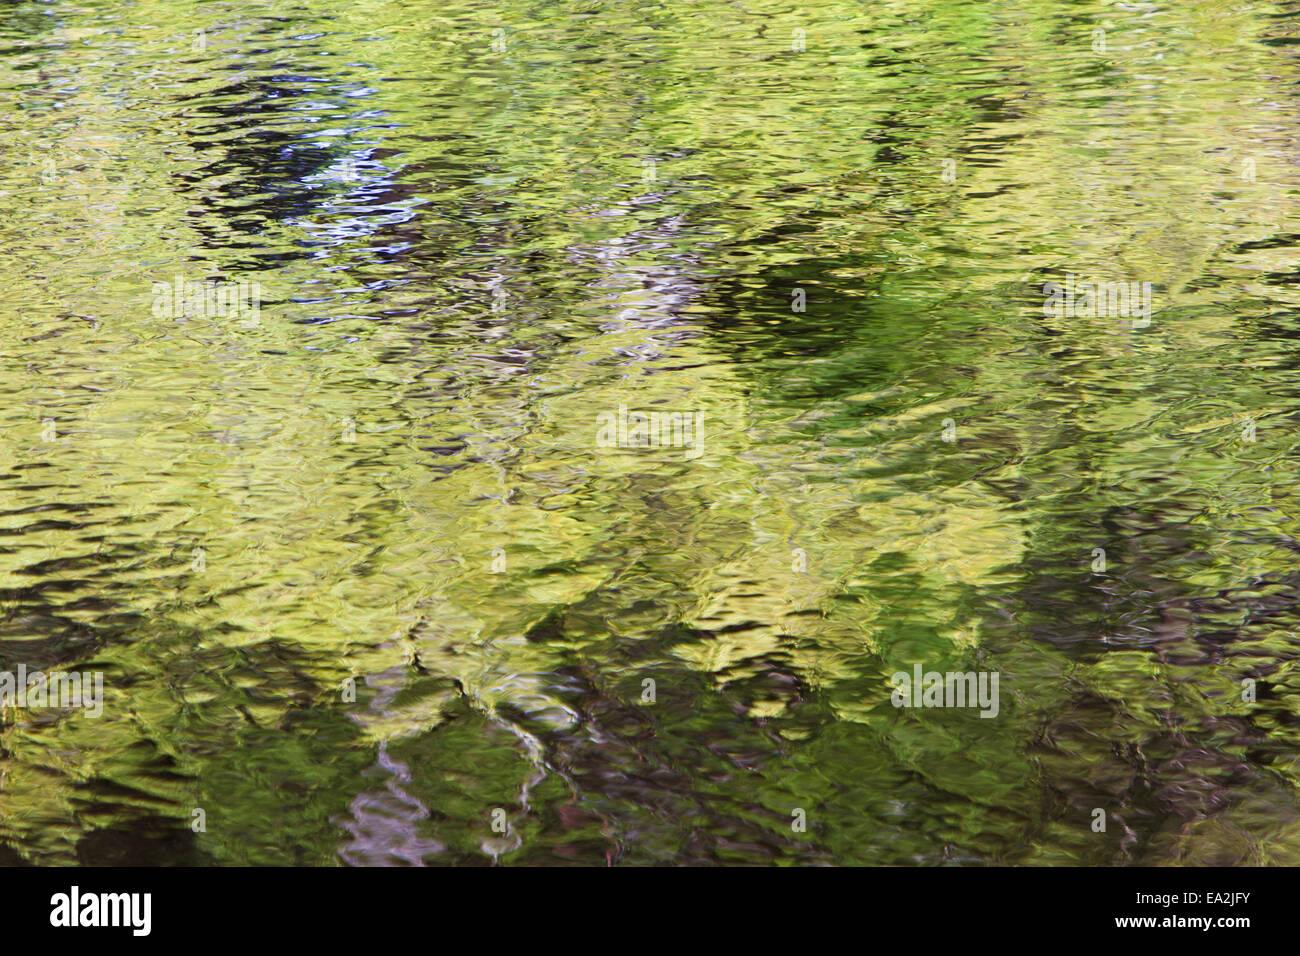 Reflections of trees on water. Stock Photo